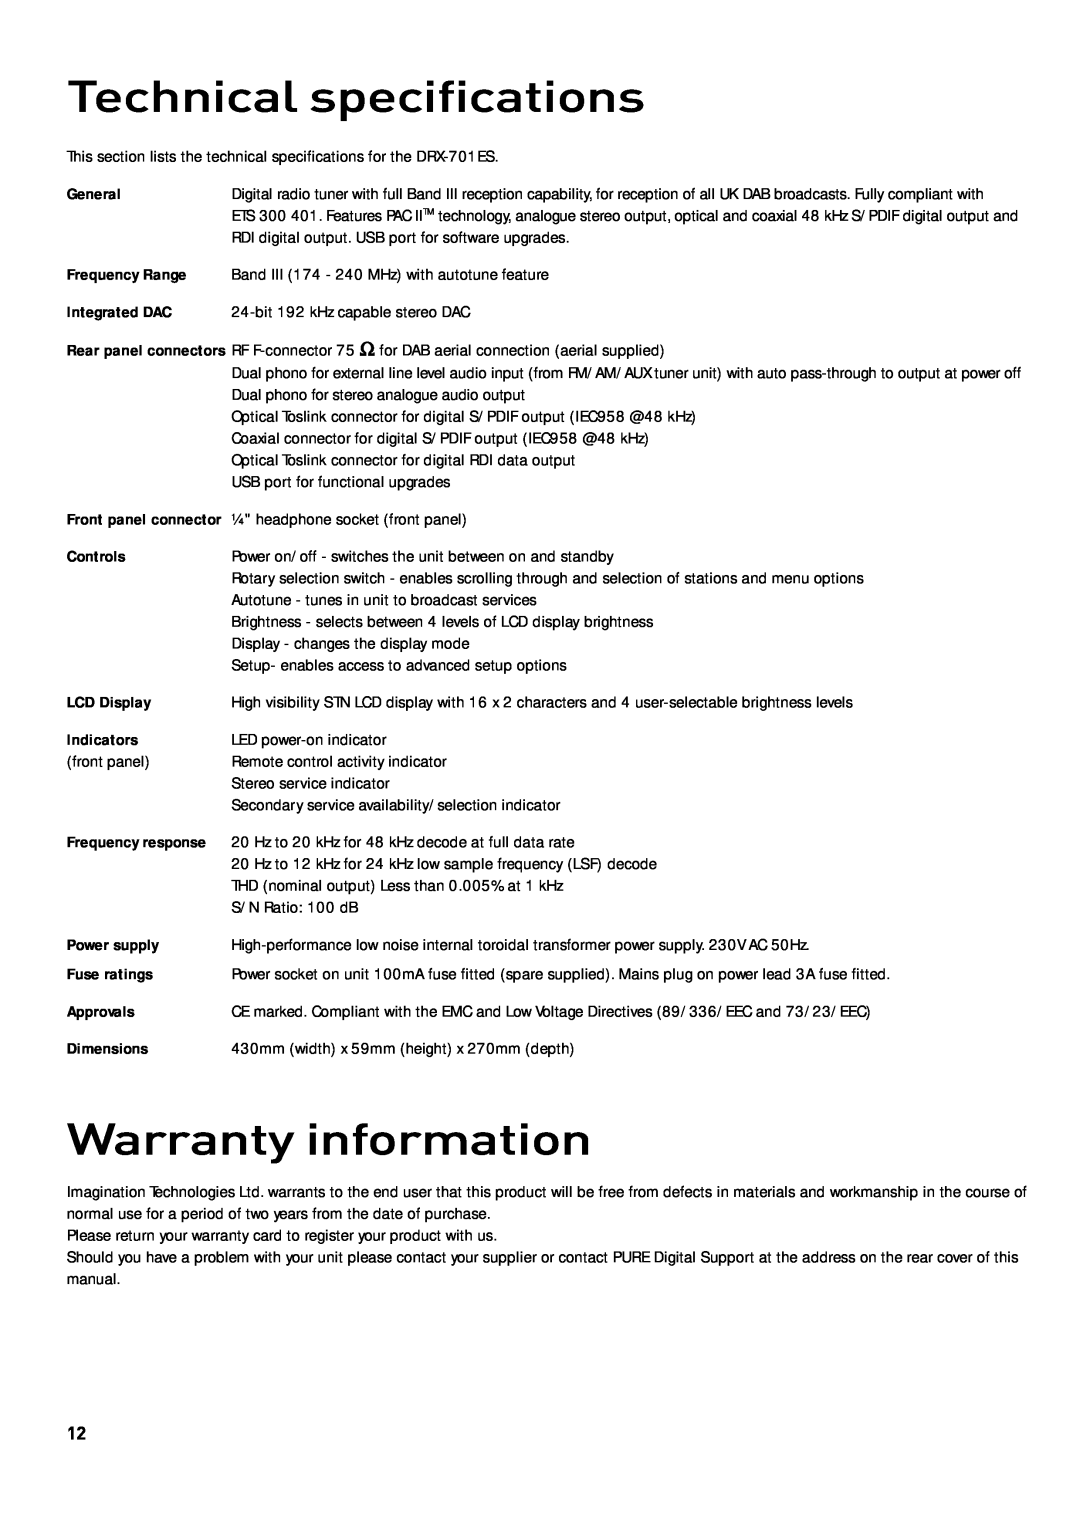 Cisco Systems DRX-701ES manual Technical specifications, Warranty information 